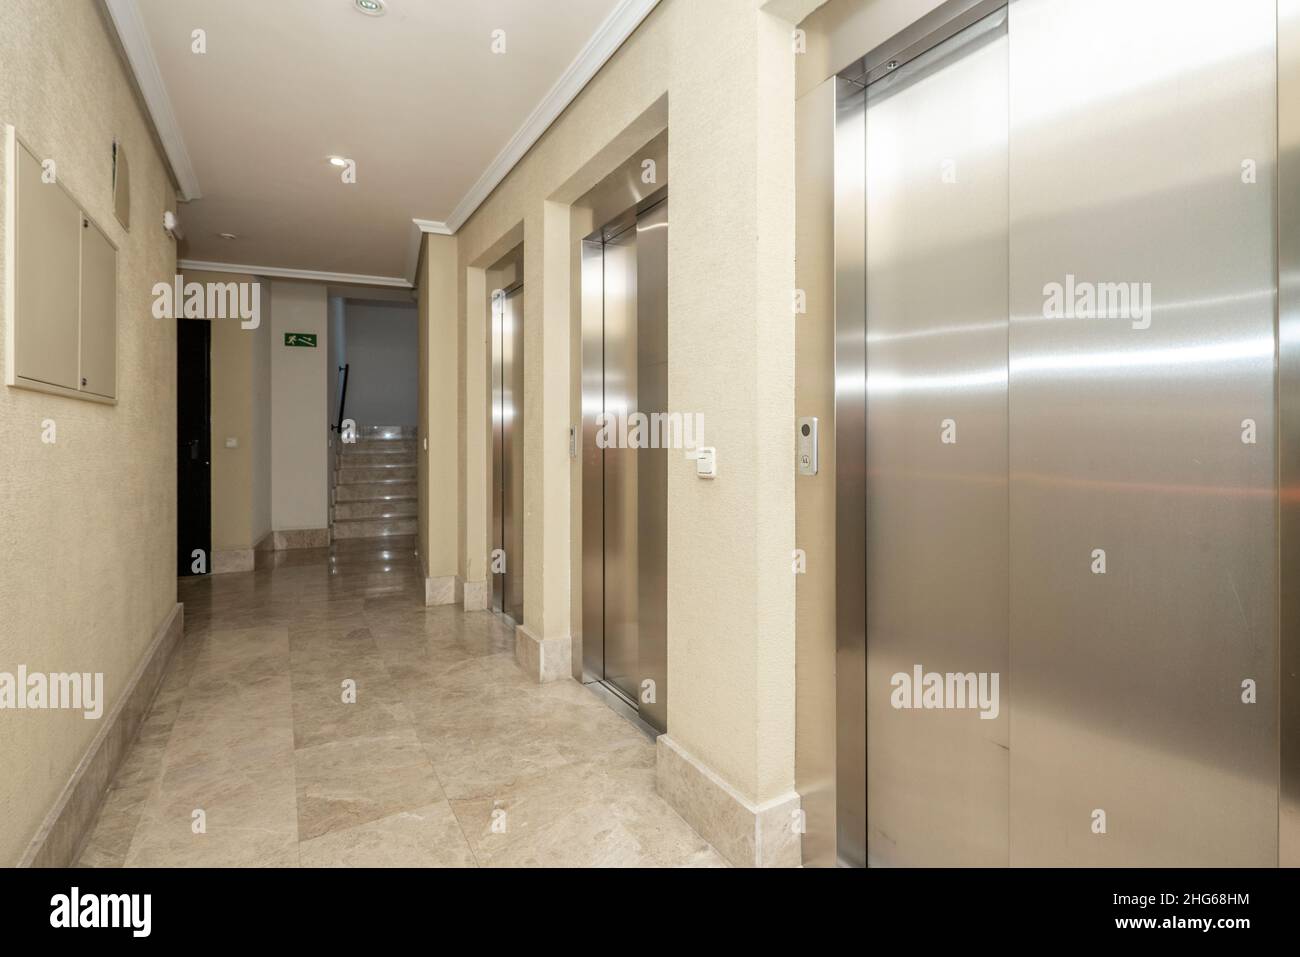 Lobby of a building with three elevators with cream marble floors Stock Photo